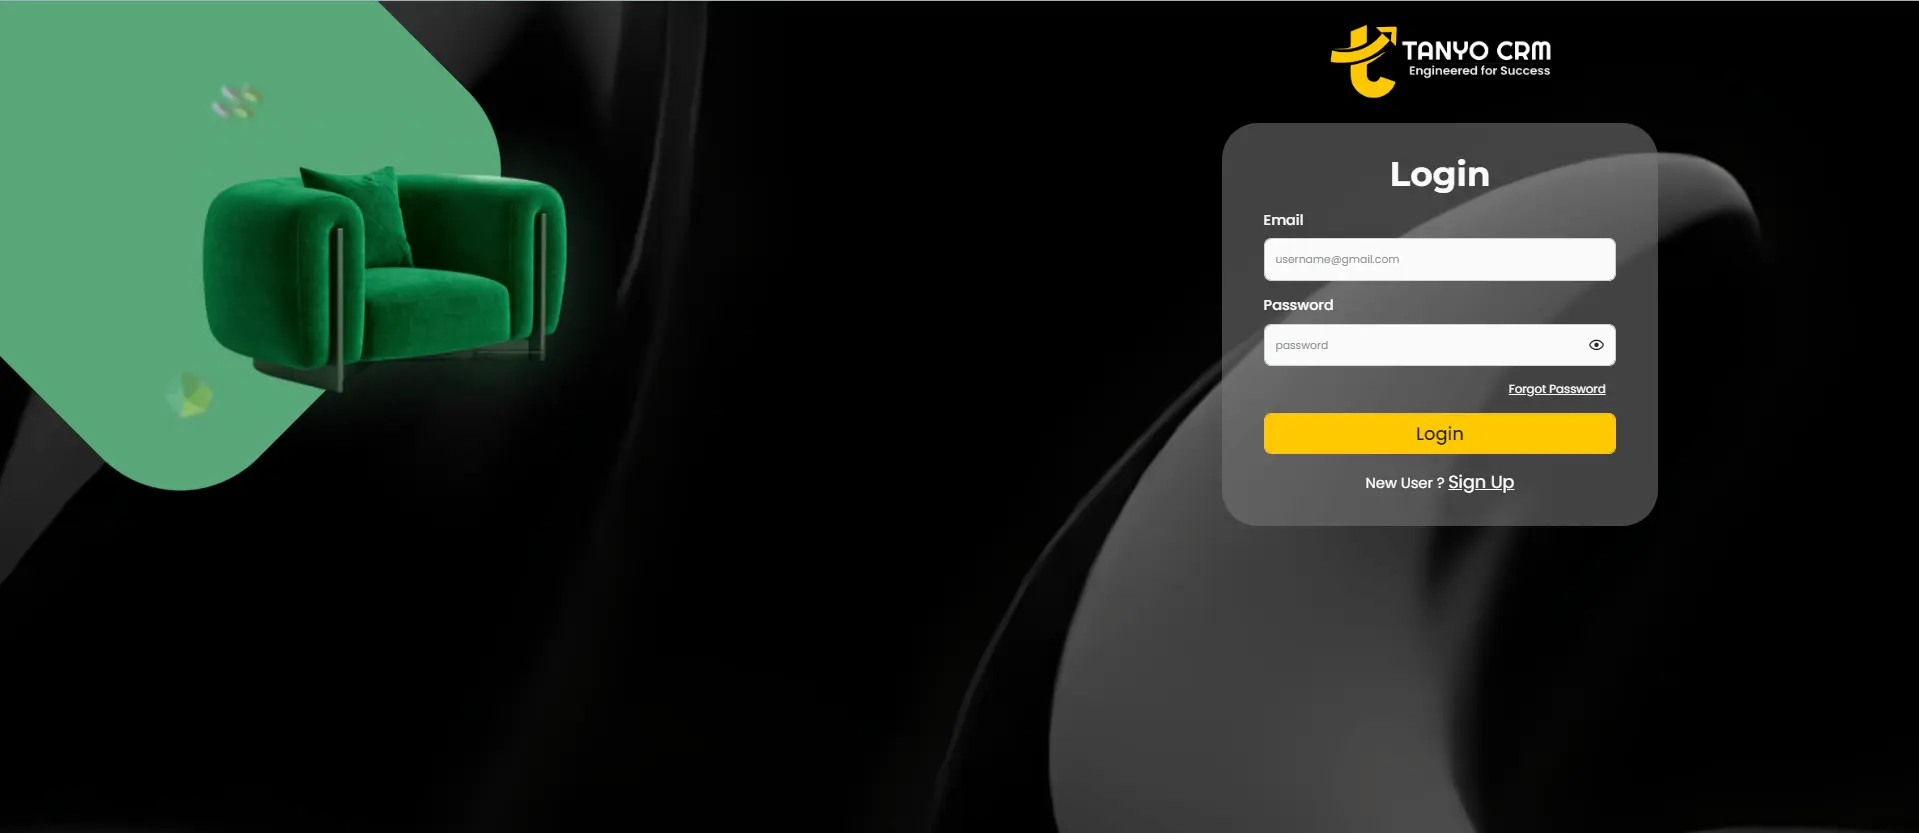 A login screen for Tanyo CRM with input fields for email and password and buttons for login, forgot password, and sign up. On the left side, there is a green couch with abstract shapes in the background on a black and green gradient.